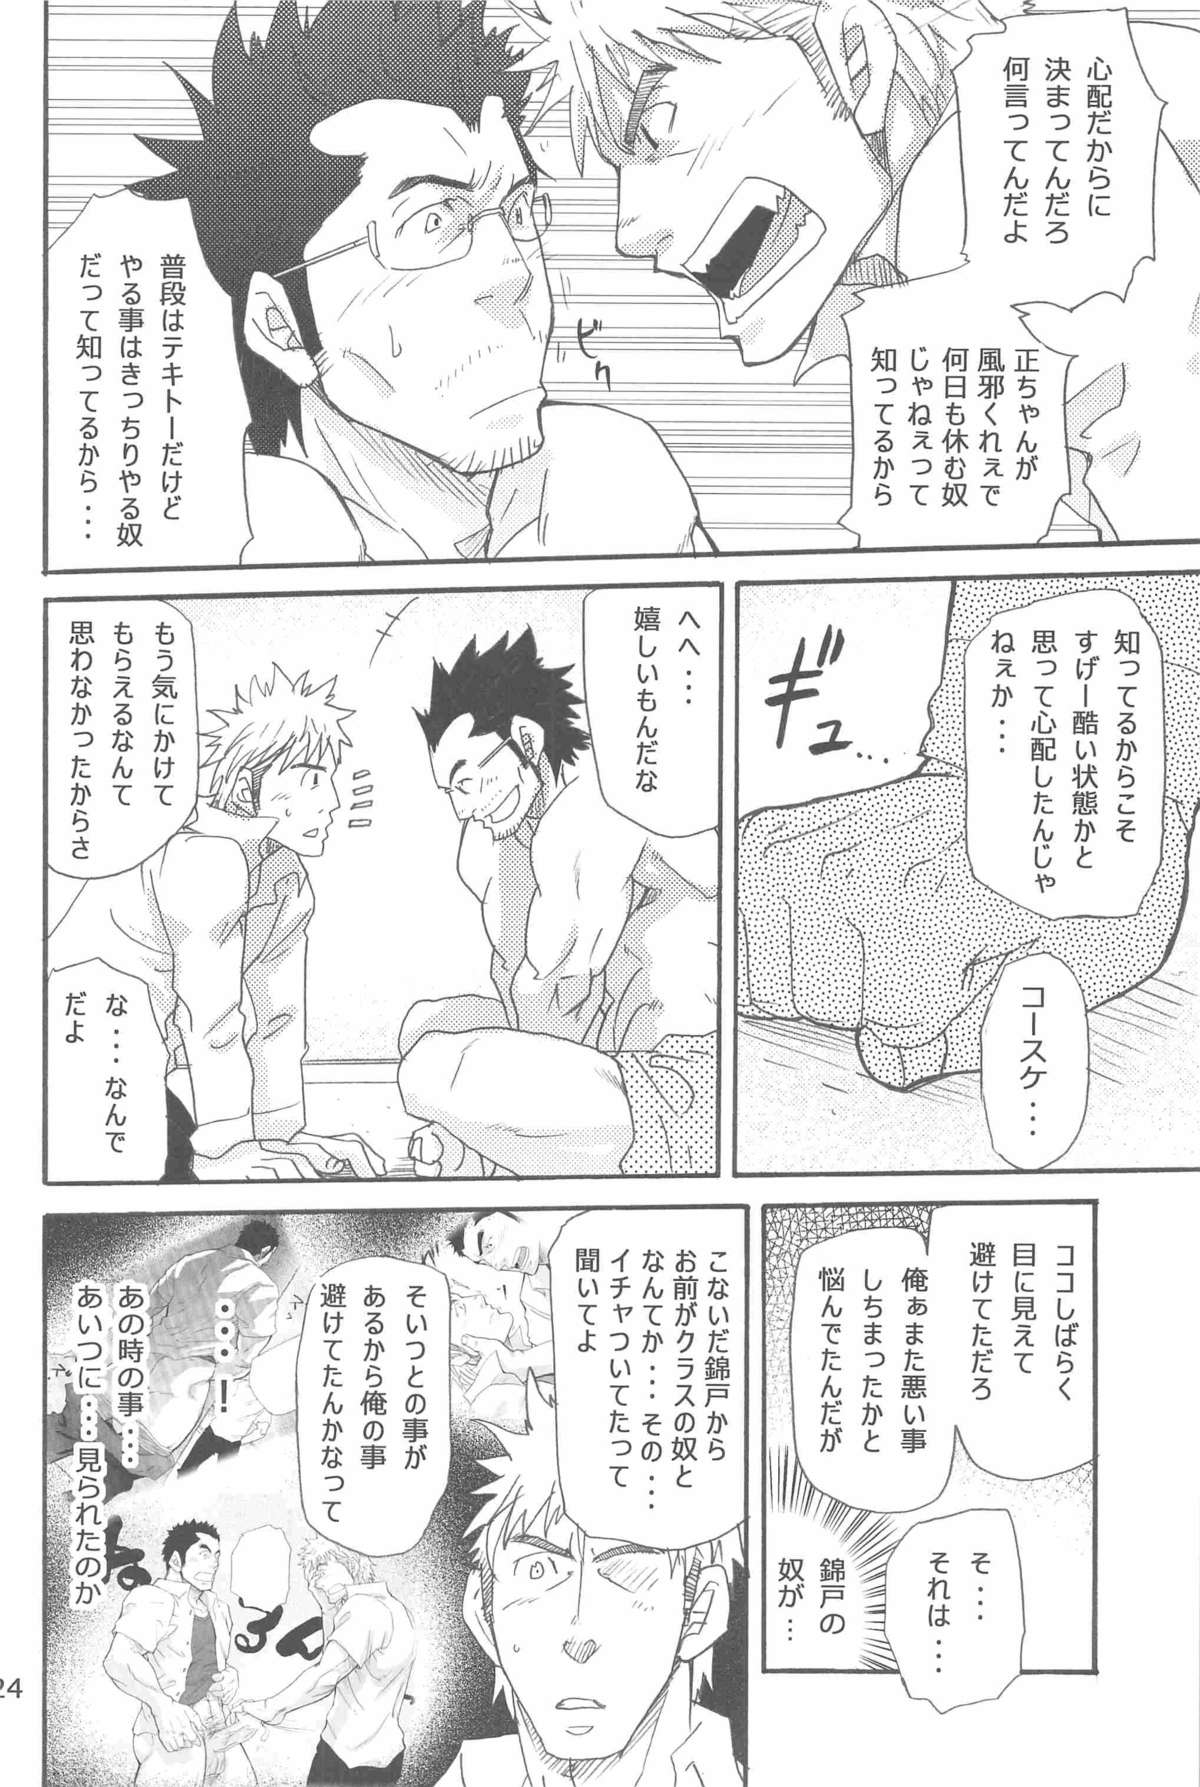 [MATSU Takeshi] More and More of You 5 page 6 full